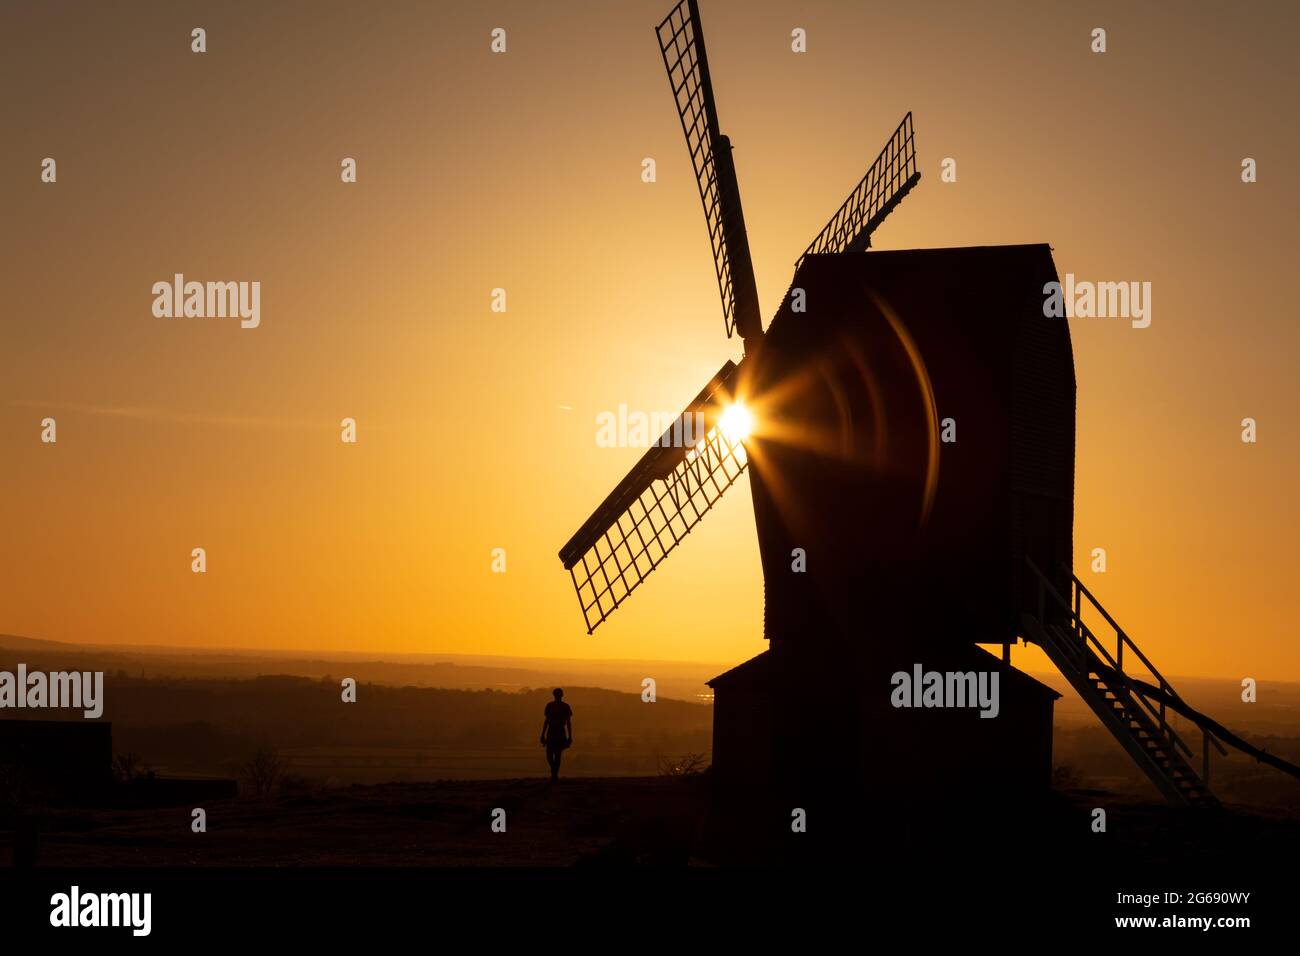 Sun setting on the horizon behind a traditional windmill at sunset with the sihouette of a man walking Stock Photo